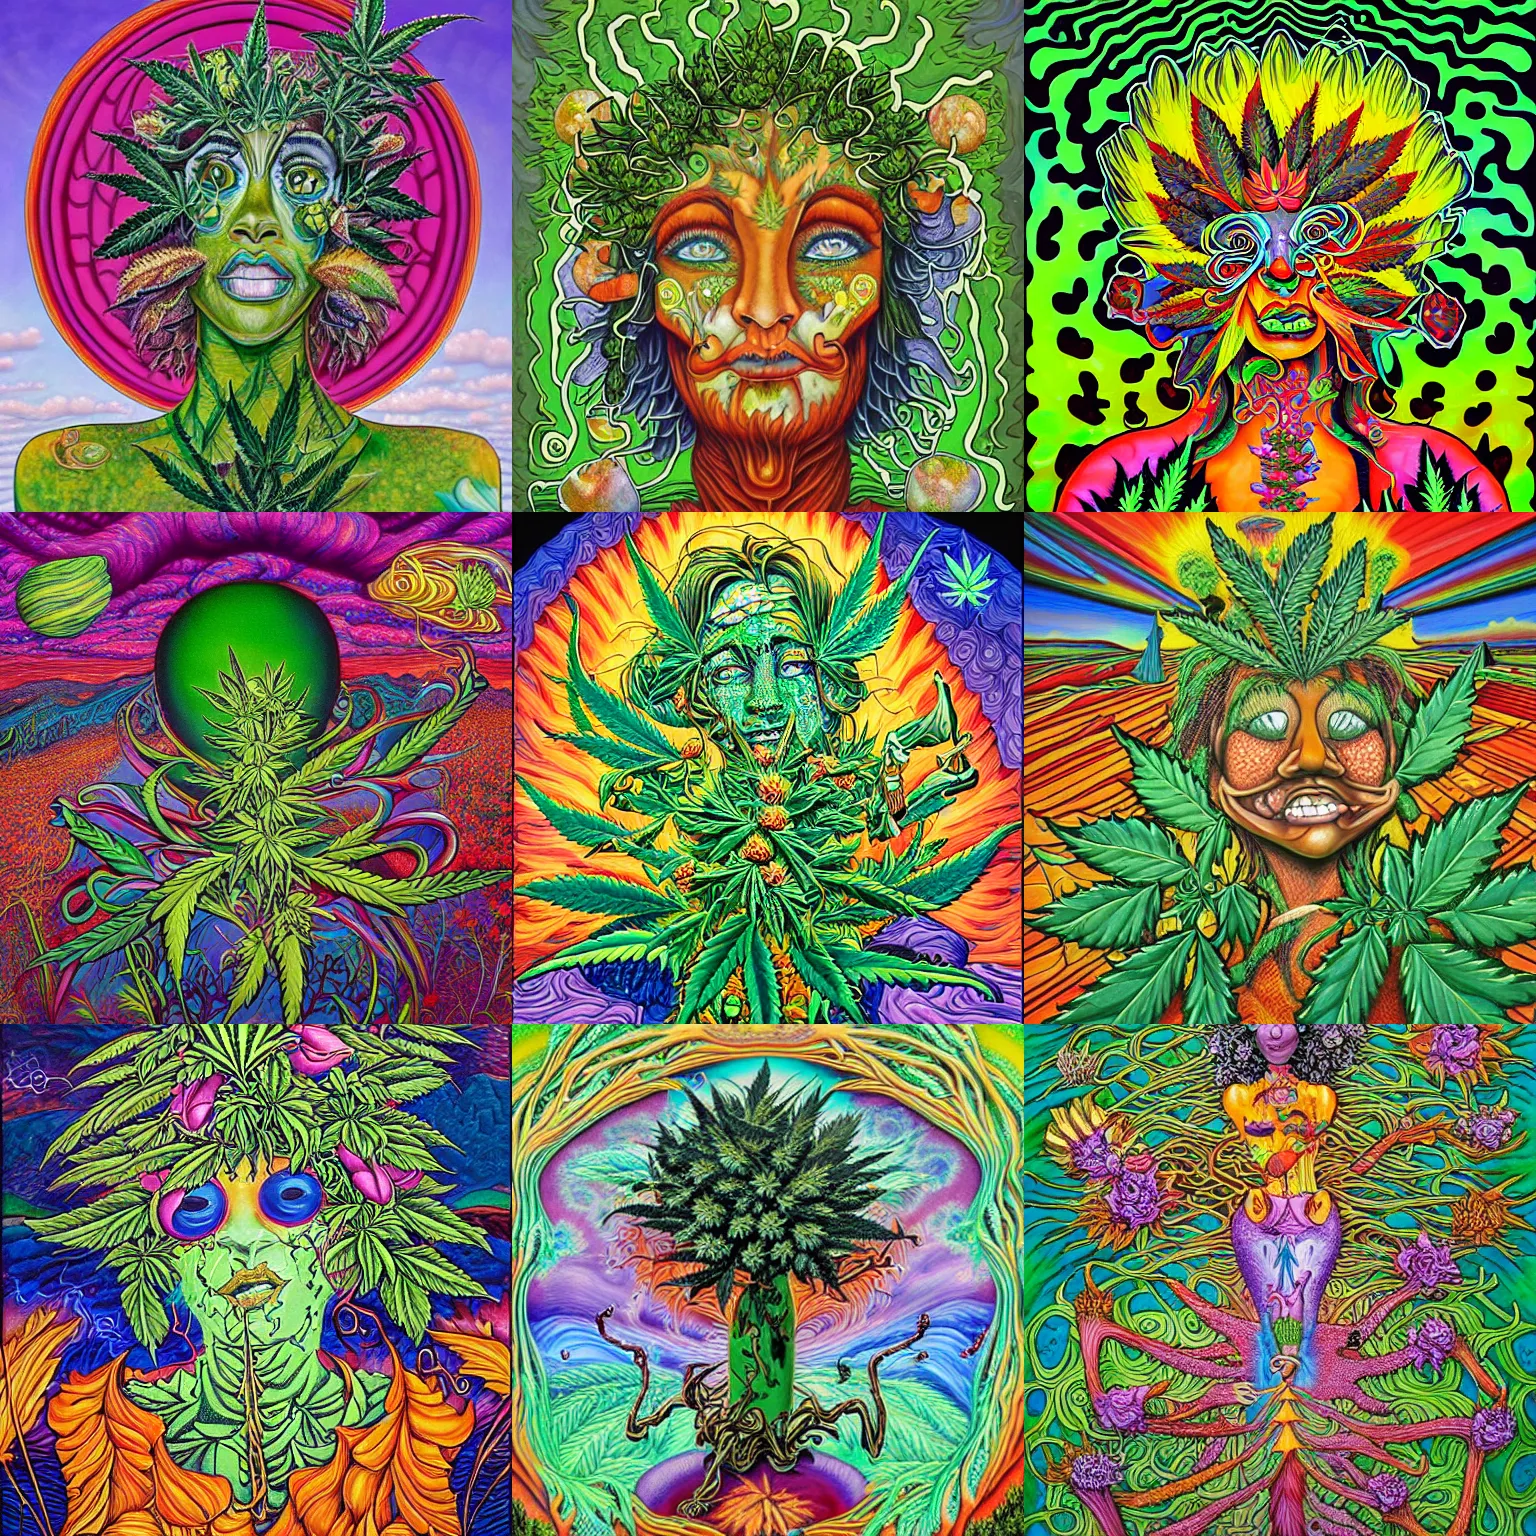 Prompt: mother nature made out of Cannabis painting by aaron brooks, chris dyer, android jones, and alex grey